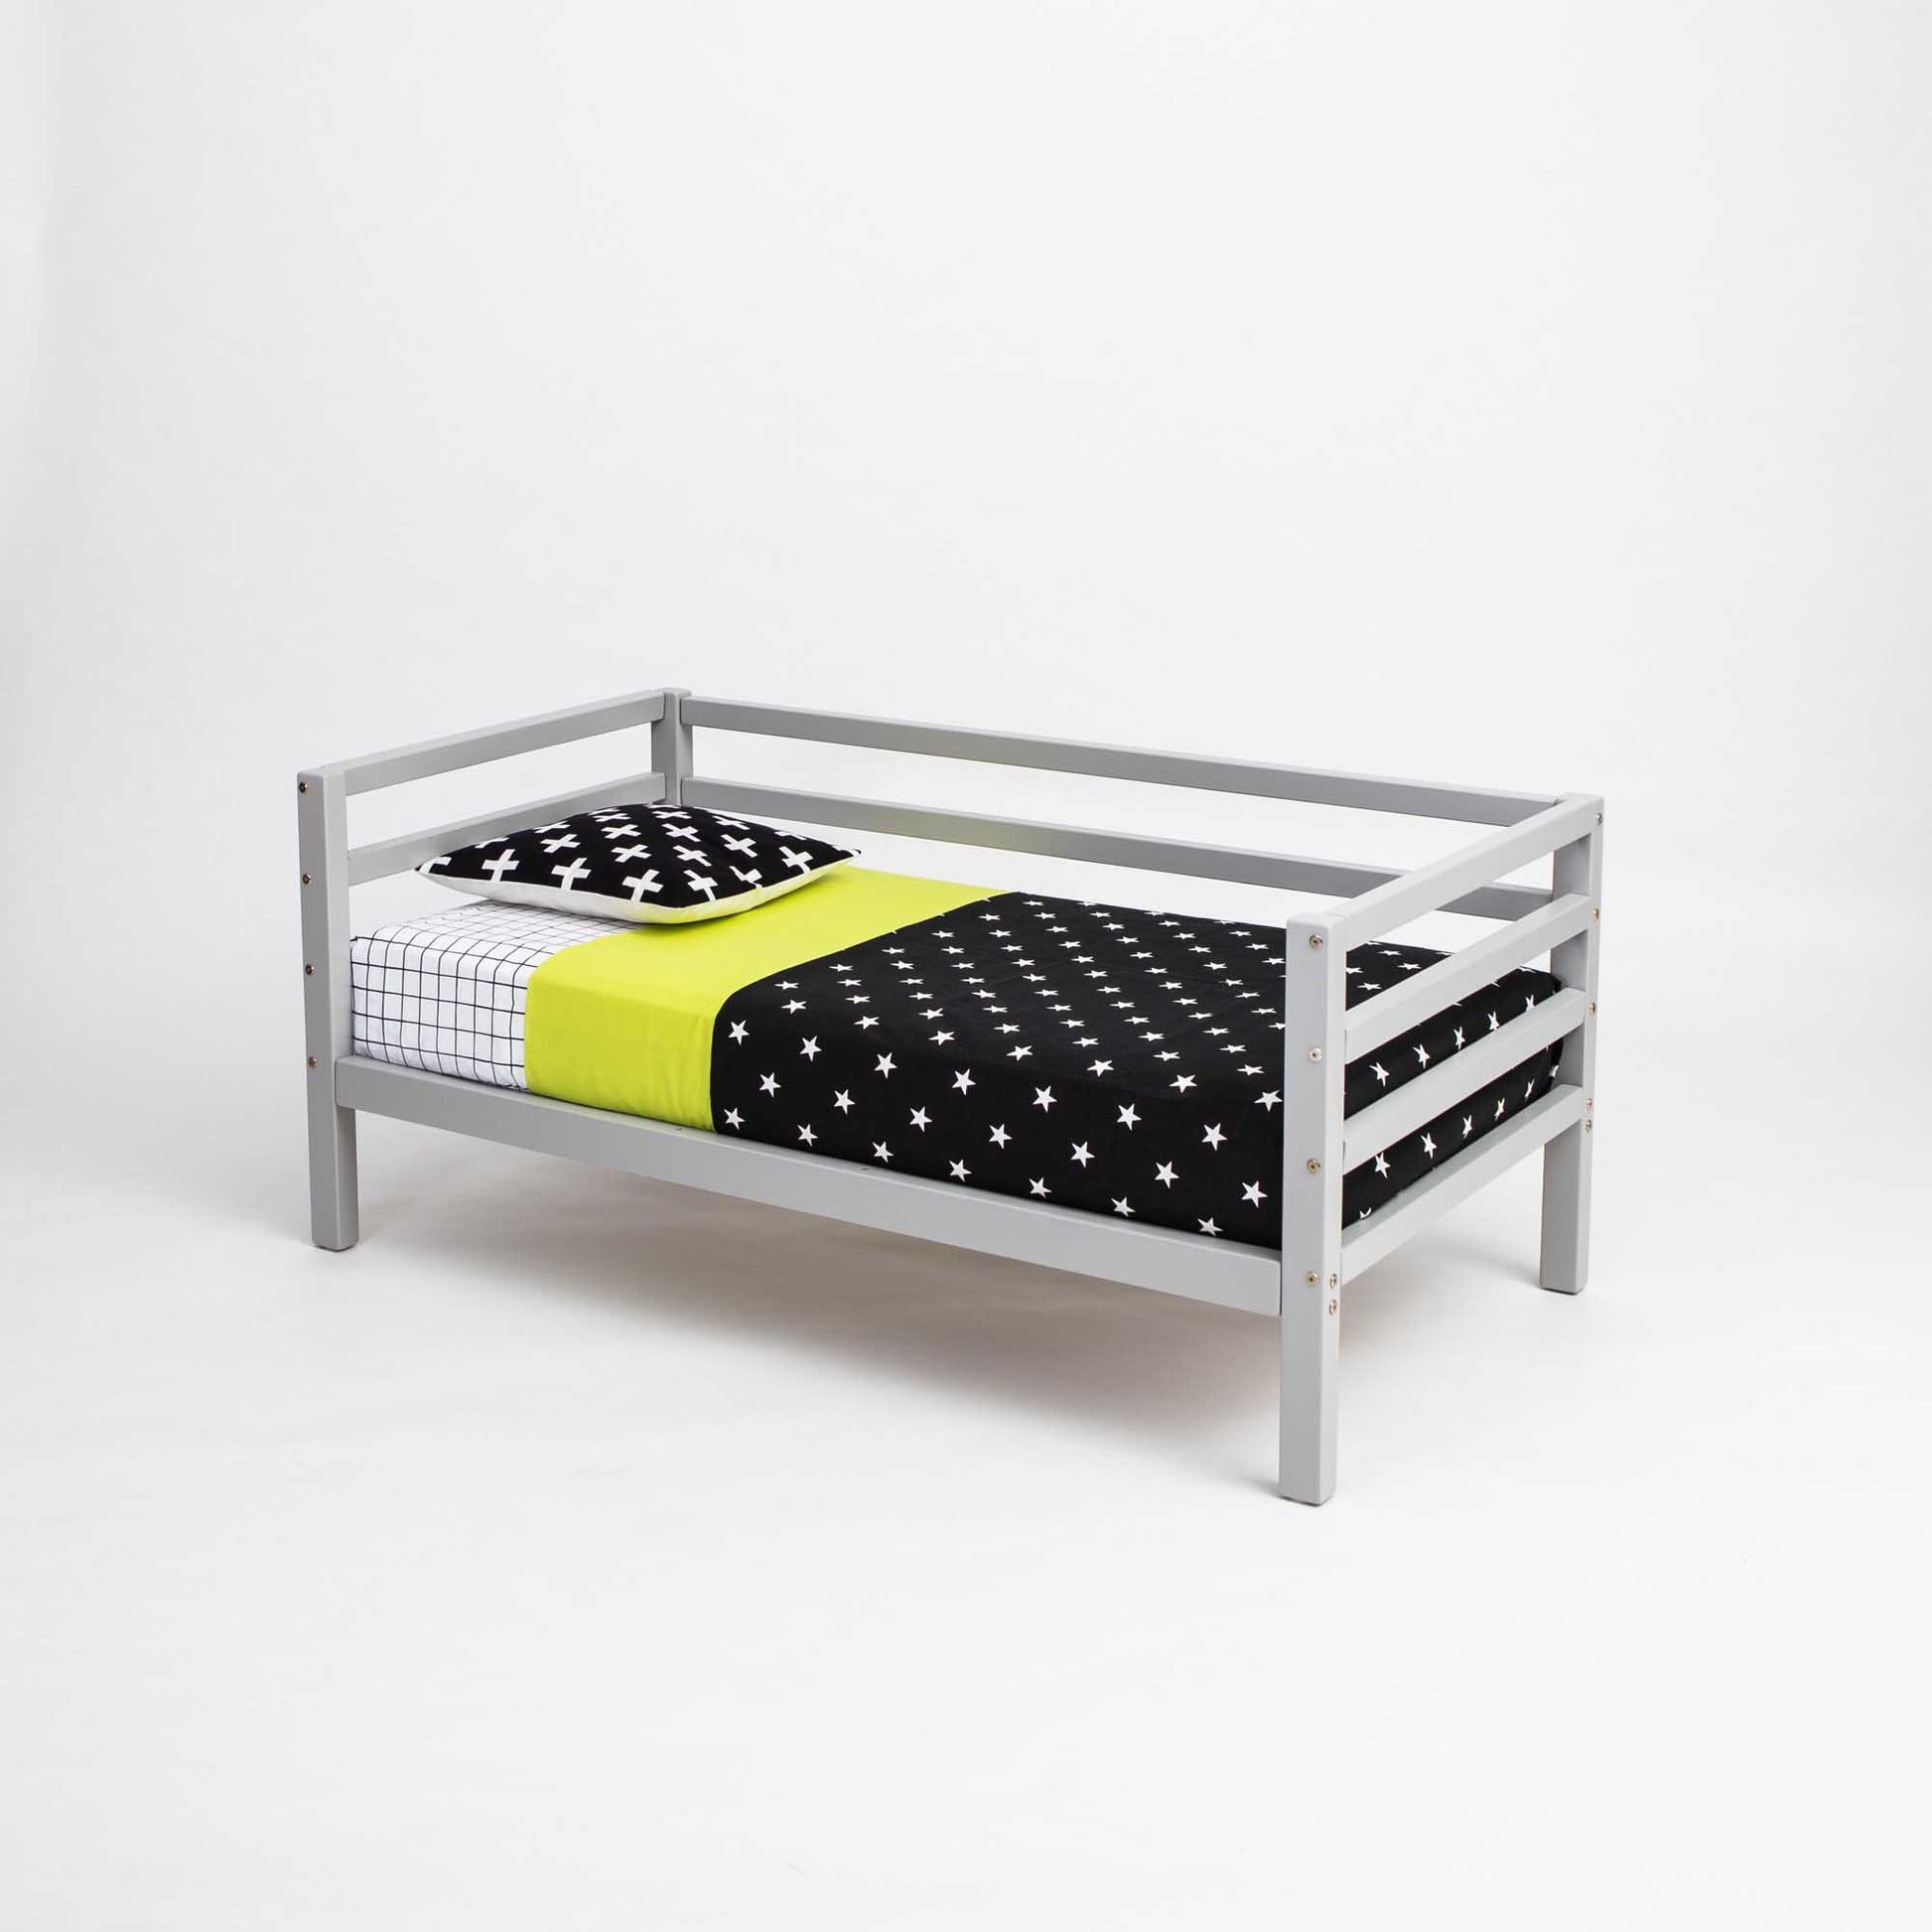 A Sweet Home From Wood 2-in-1 transformable kids' bed with a 3-sided horizontal rail, featuring a grey toddler bed and a black and yellow polka dot blanket.